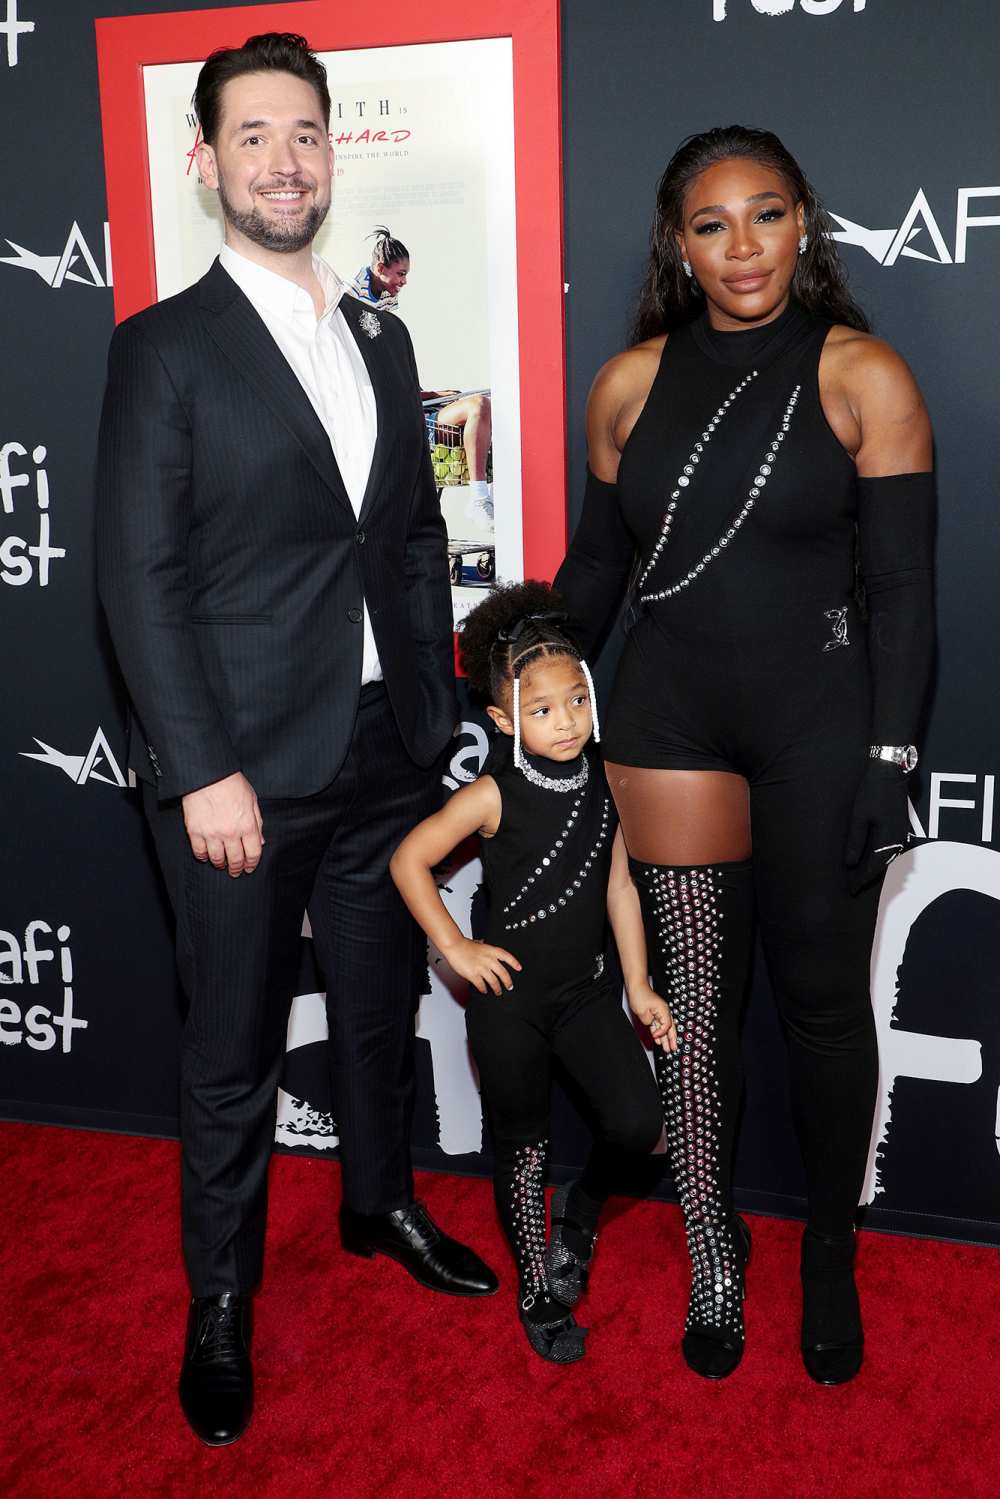 Serena Williams Describes Near-Death Birth Experience and 4 Surgeries 2 Alexis Ohanian, Serena Williams and Olympia Williams